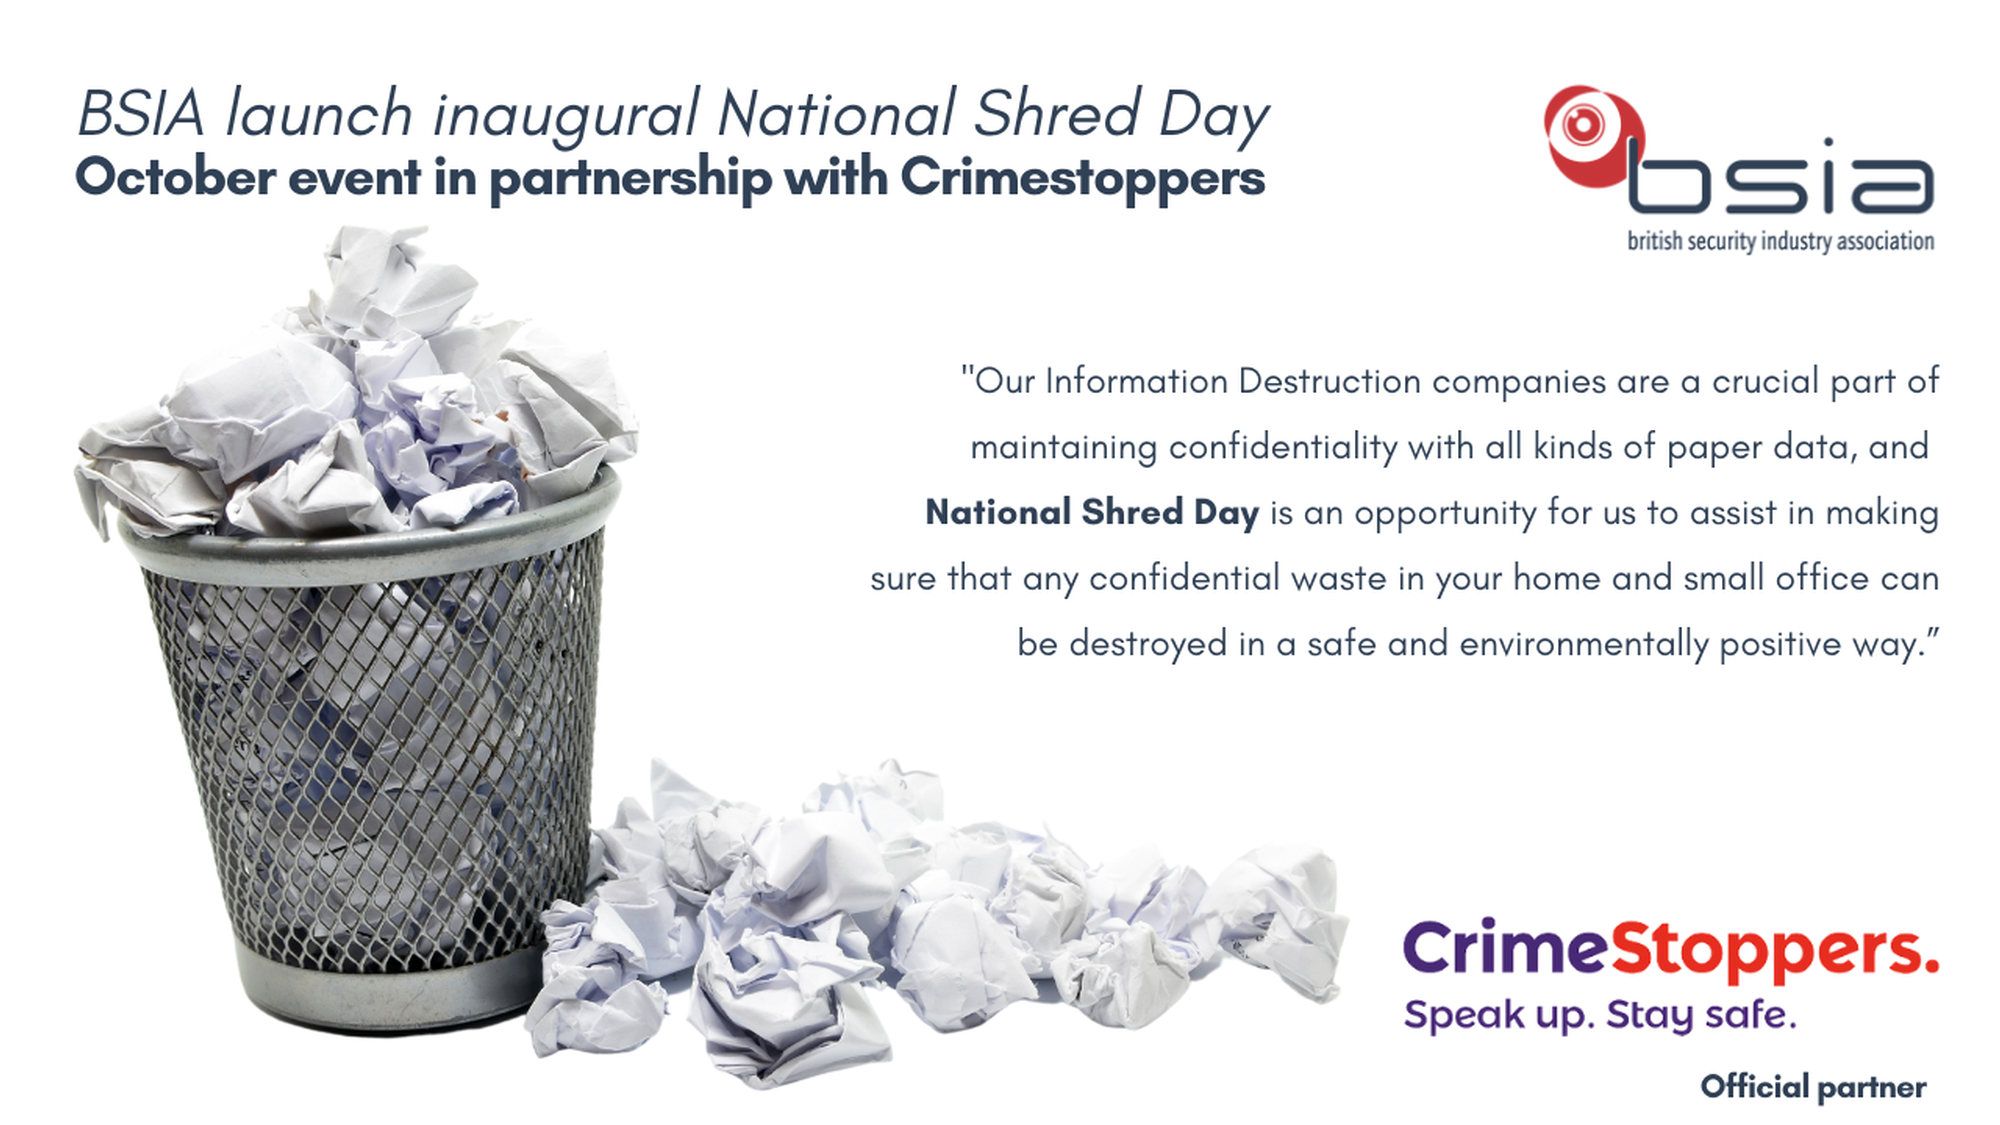 BSIA launches inaugural National Shred Day in partnership with charity Crimestopppers